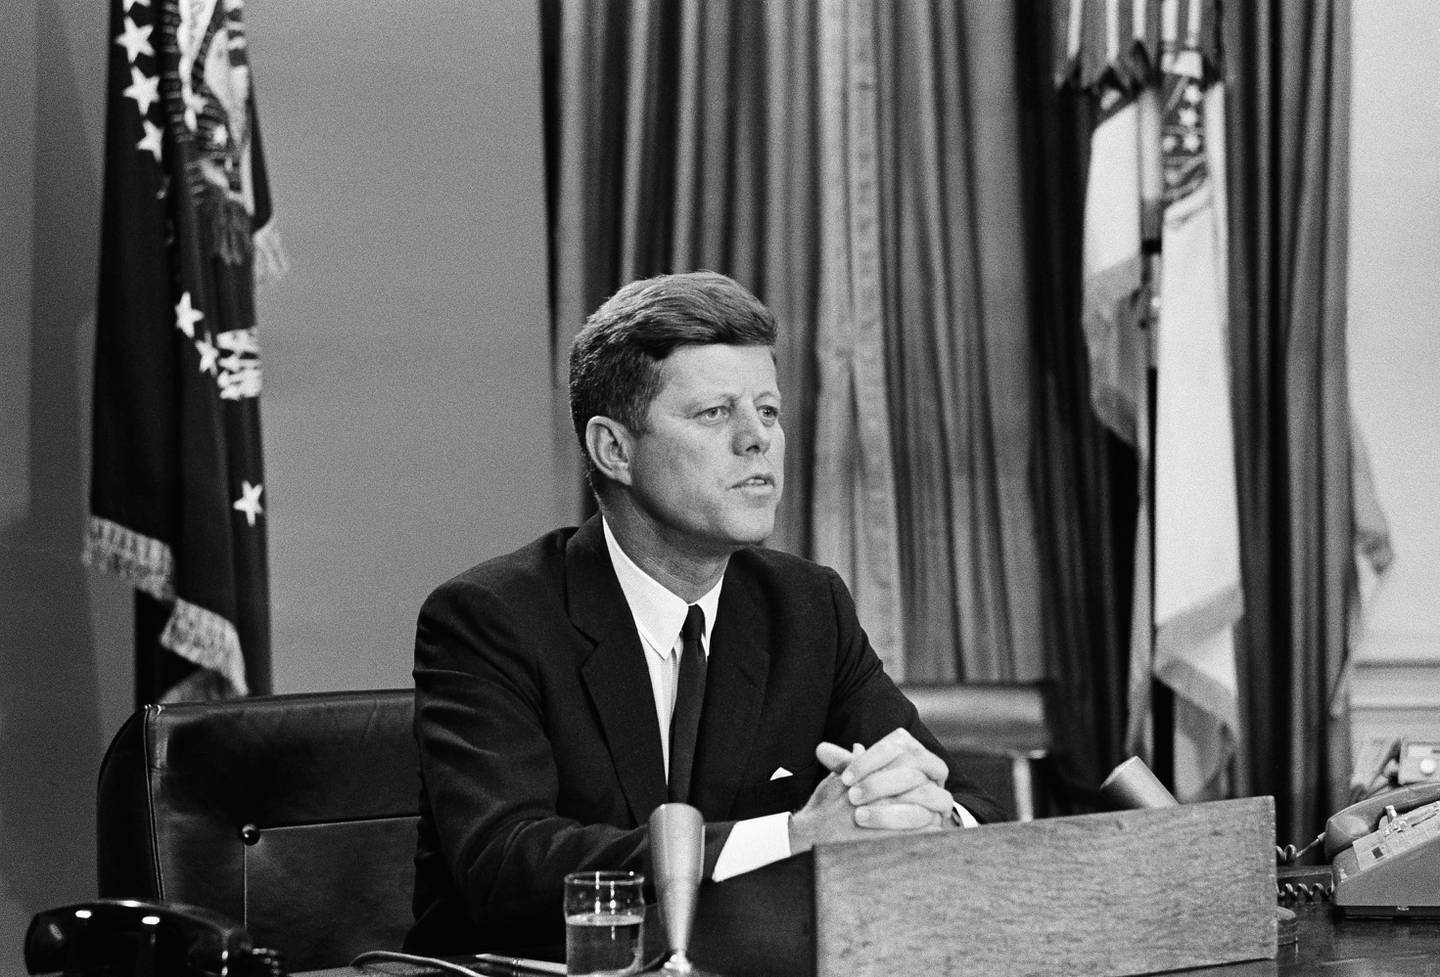 President John Kennedy as he made a nation-wide televised broadcast on civil rights in the White House, June 11, 1963.  His talk climaxed a day during which Alabama Gov. George  Wallace defied a Federal Court order to admit two black students to the University of Alabama at Tuscaloosa.  Wallace withdrew after the National Guard was federalized and placed on duty on the university campus.  The president asked the American people for help in ending racial discrimination and termed the fulfillment of Negro rights, a moral issue. (AP Photo/Charles Gorry)